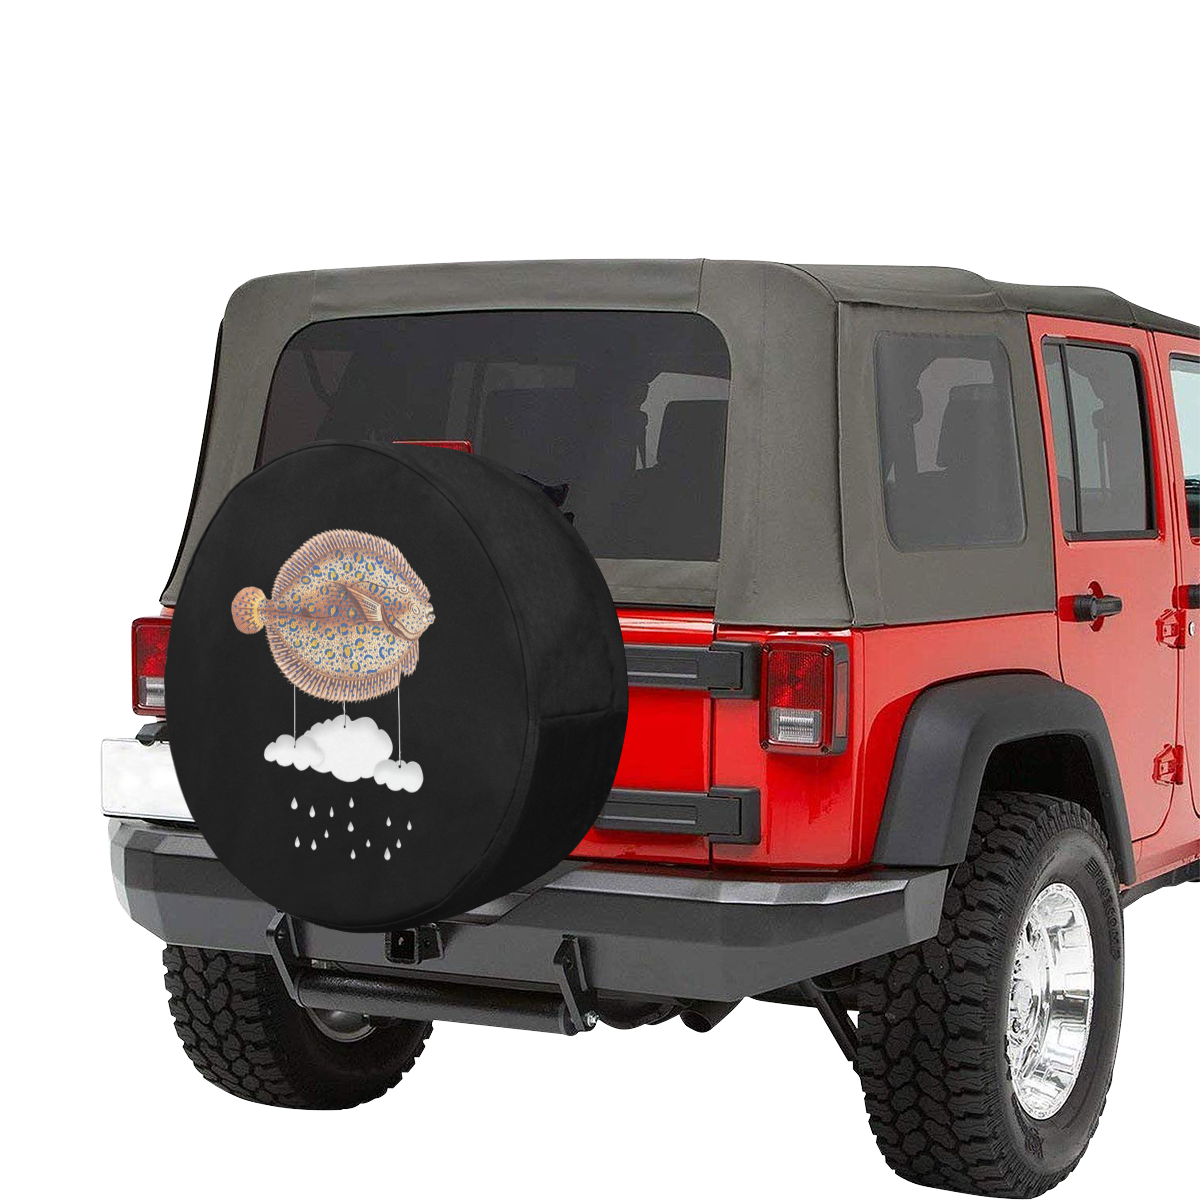 The Cloud Fish Surreal 34 Inch Spare Tire Cover